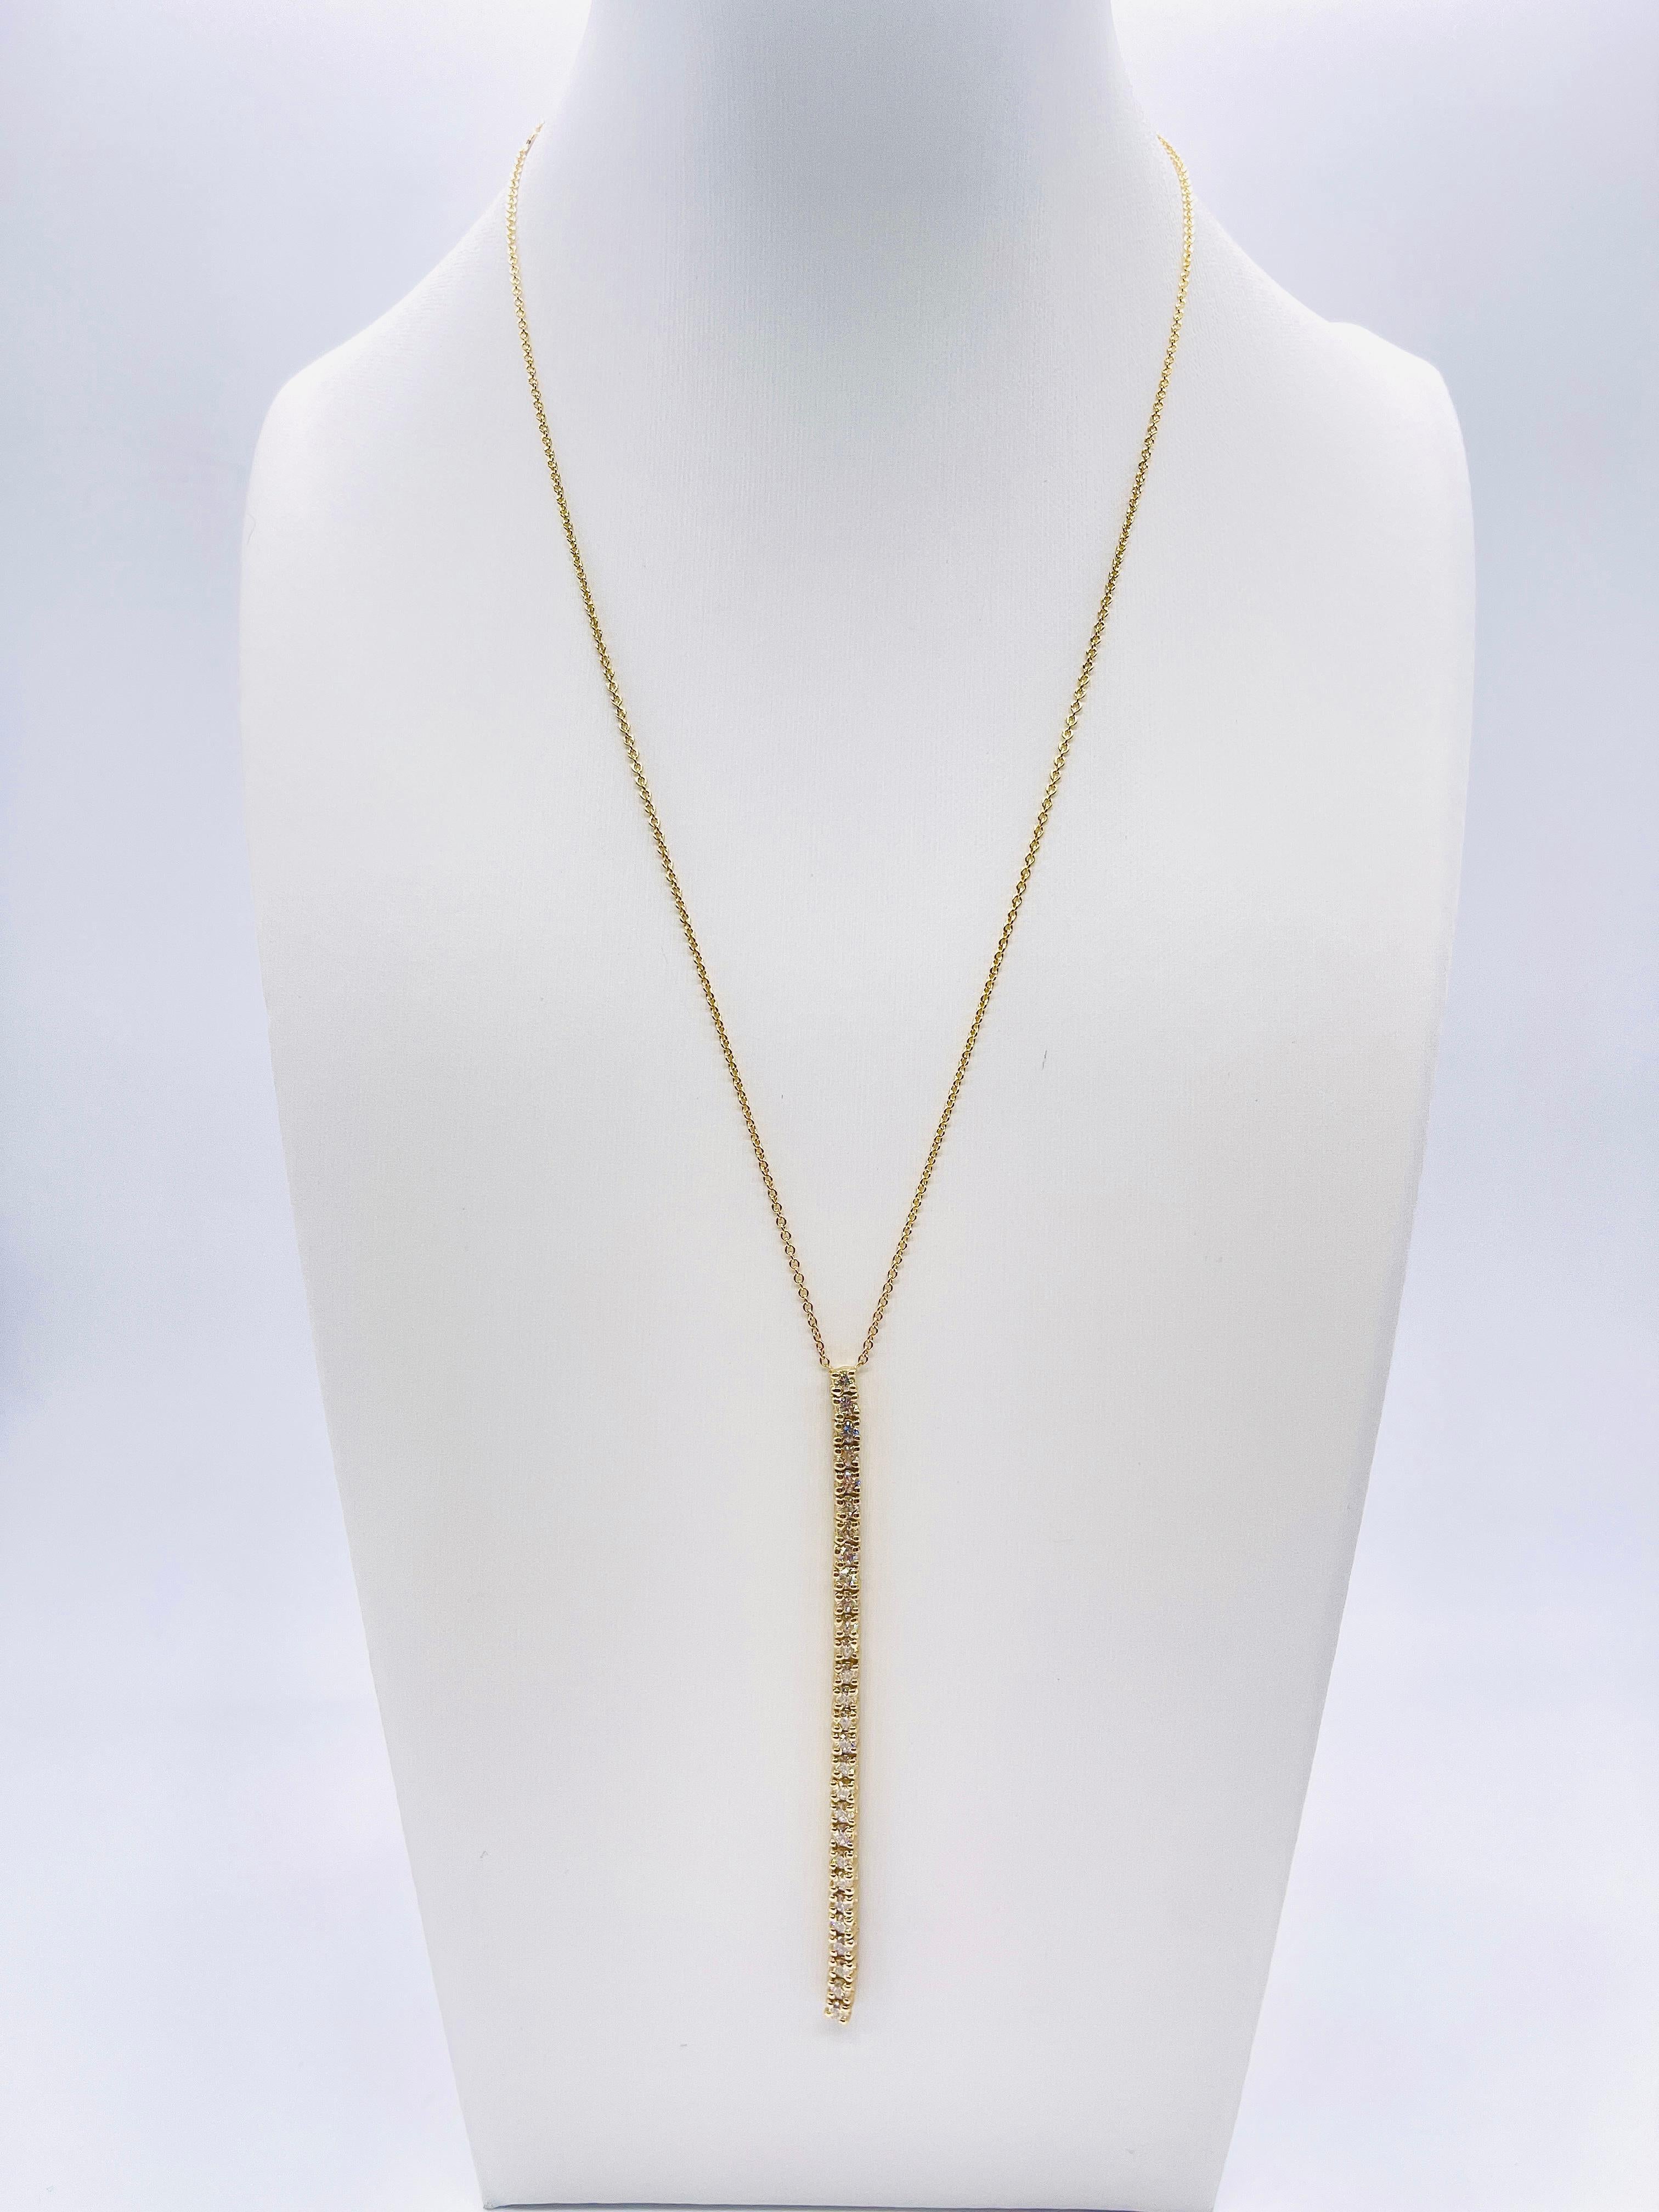 Elegant and minimalistic piece.
All natural diamonds in tennis style drop necklace in 14k yellow gold.  28 pieces, 24 inch length, 6.08grams, average H-VS

*Free shipping within the U.S.*